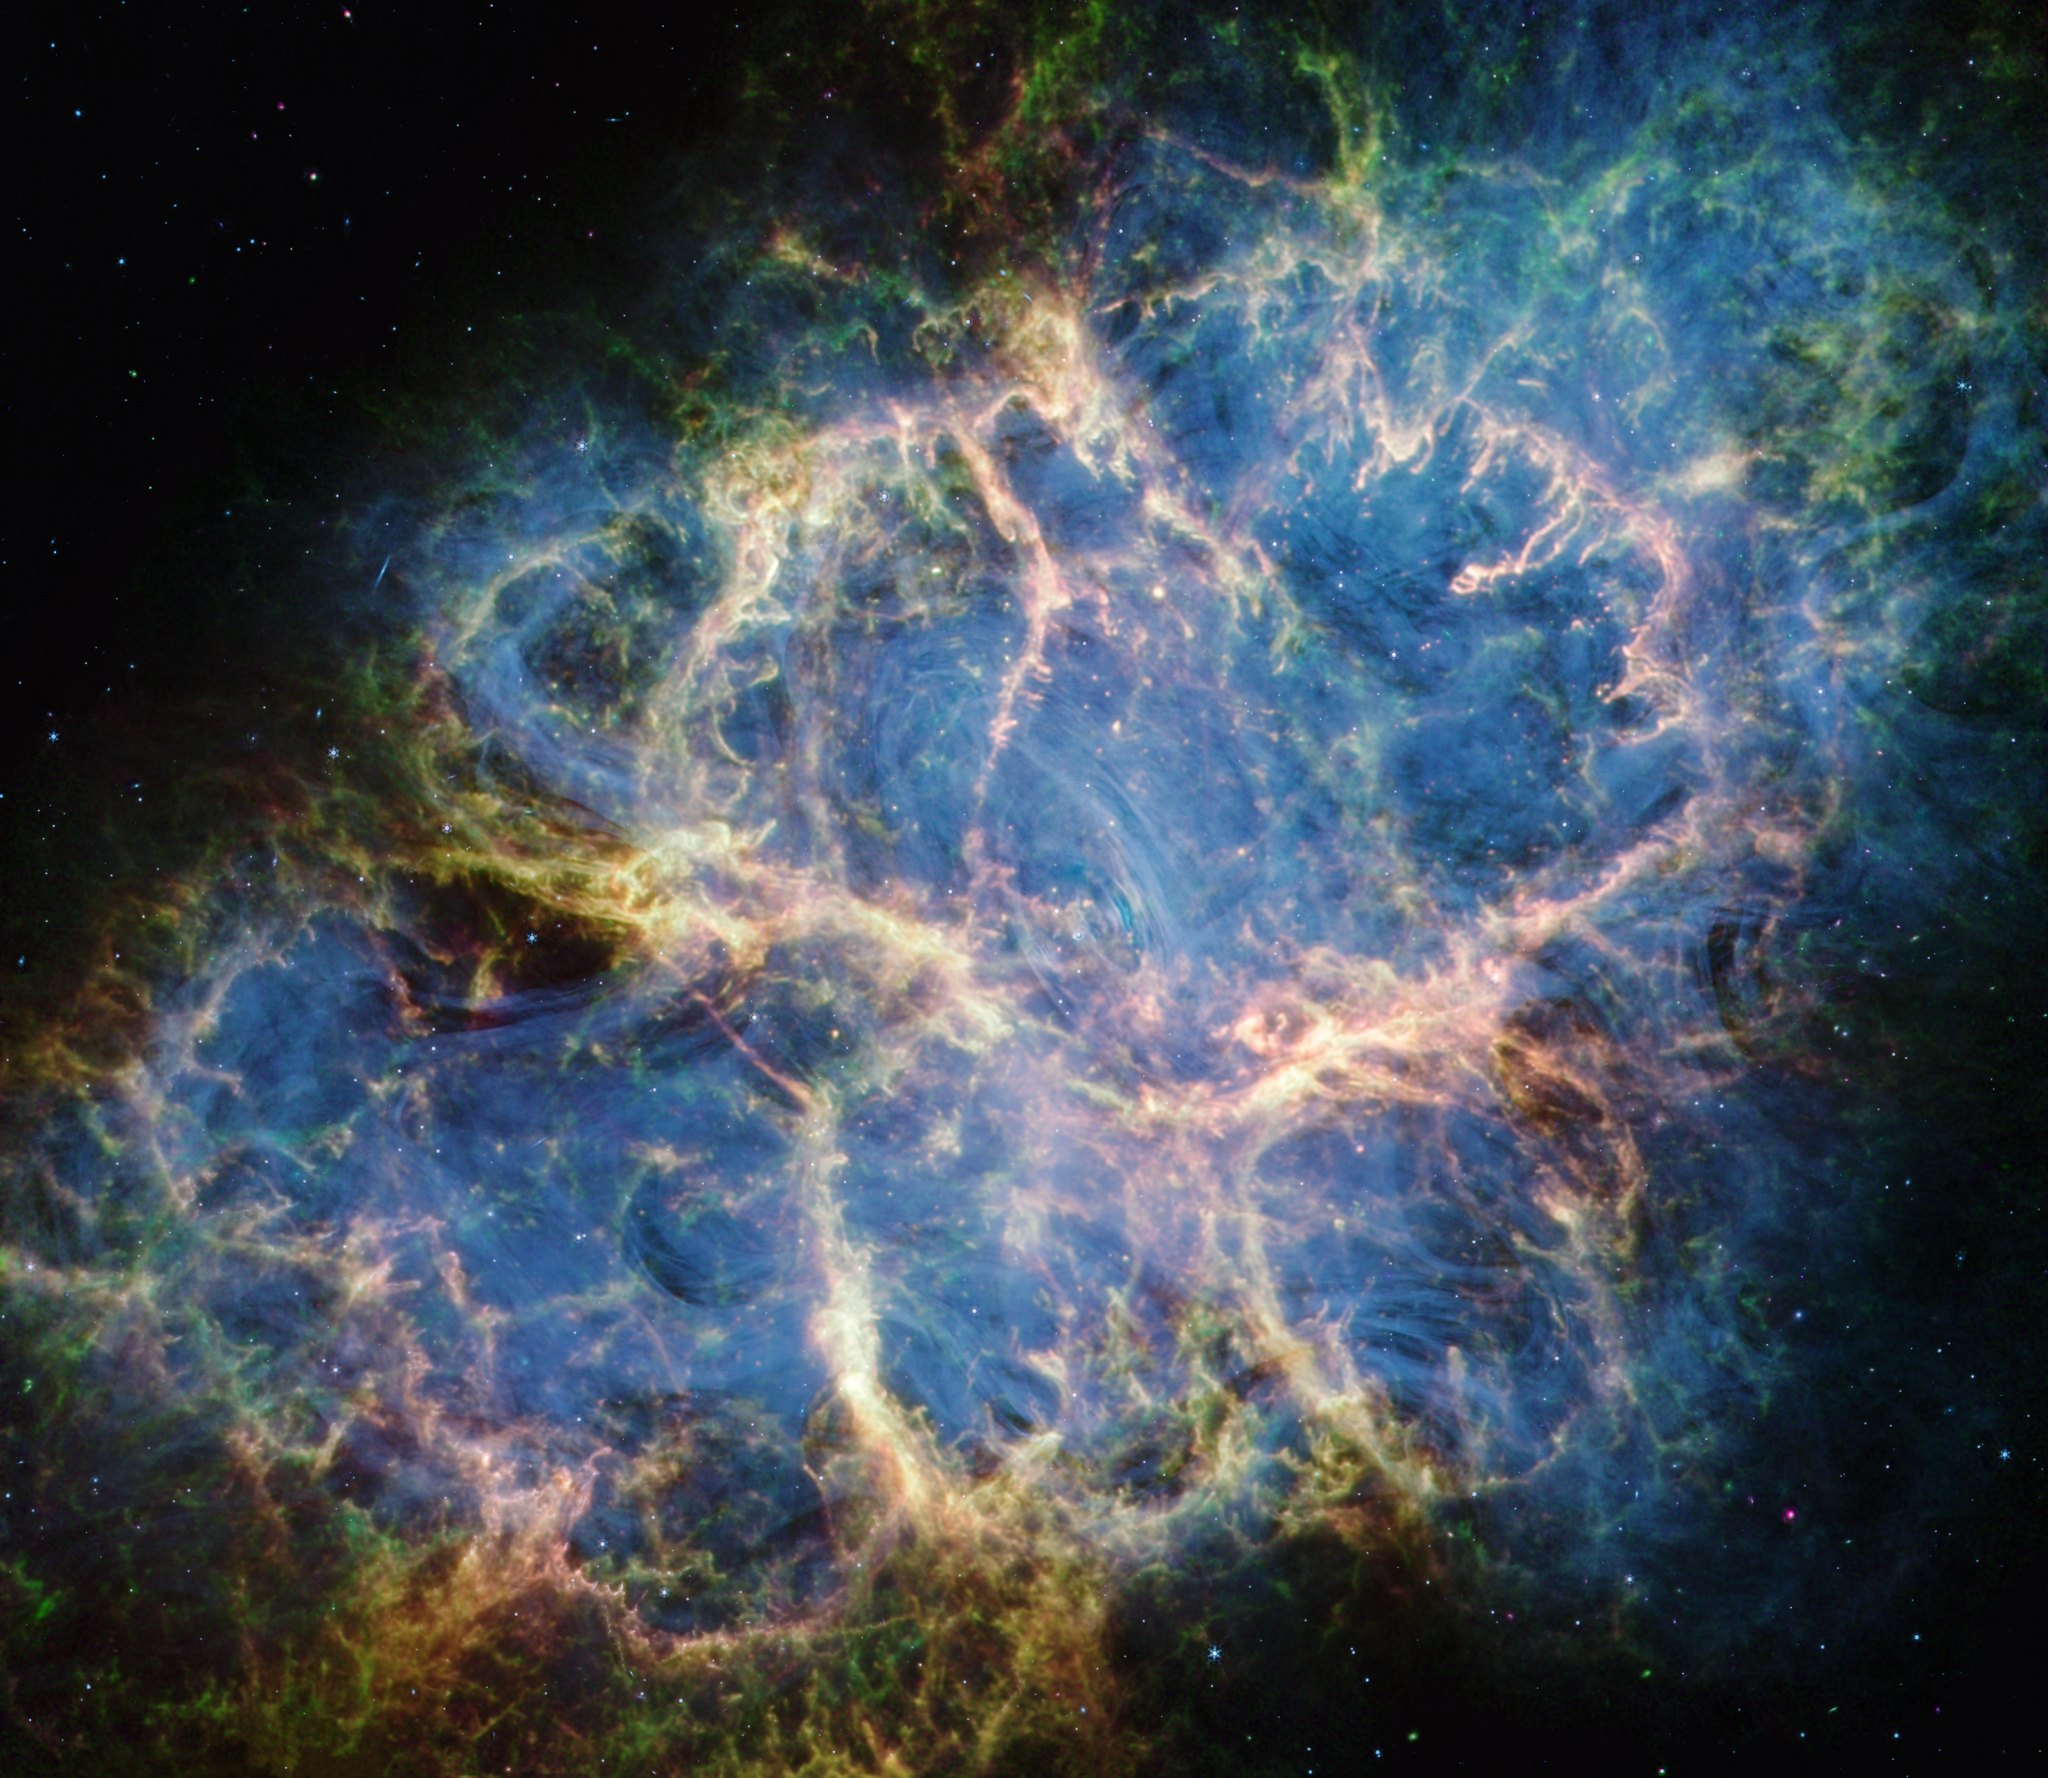 The Crab Nebula. An oval with complex structure extends from lower left to upper right against a black background. On the oval’s exterior lie curtains of glowing yellow and green fluffy material. Its interior shell shows large-scale loops of mottled filaments of yellow-white and green, studded with clumps and knots. Translucent thin ribbons of smoky blue lie within the remnant’s interior, brightest toward its center. The blue material follows different directions throughout, including sometimes sharply curving away from certain regions within the remnant. A faint, wispy ring of blue material encircles the very center of the nebula. Around and within the supernova remnant are many points of blue, green, purple, and white light.